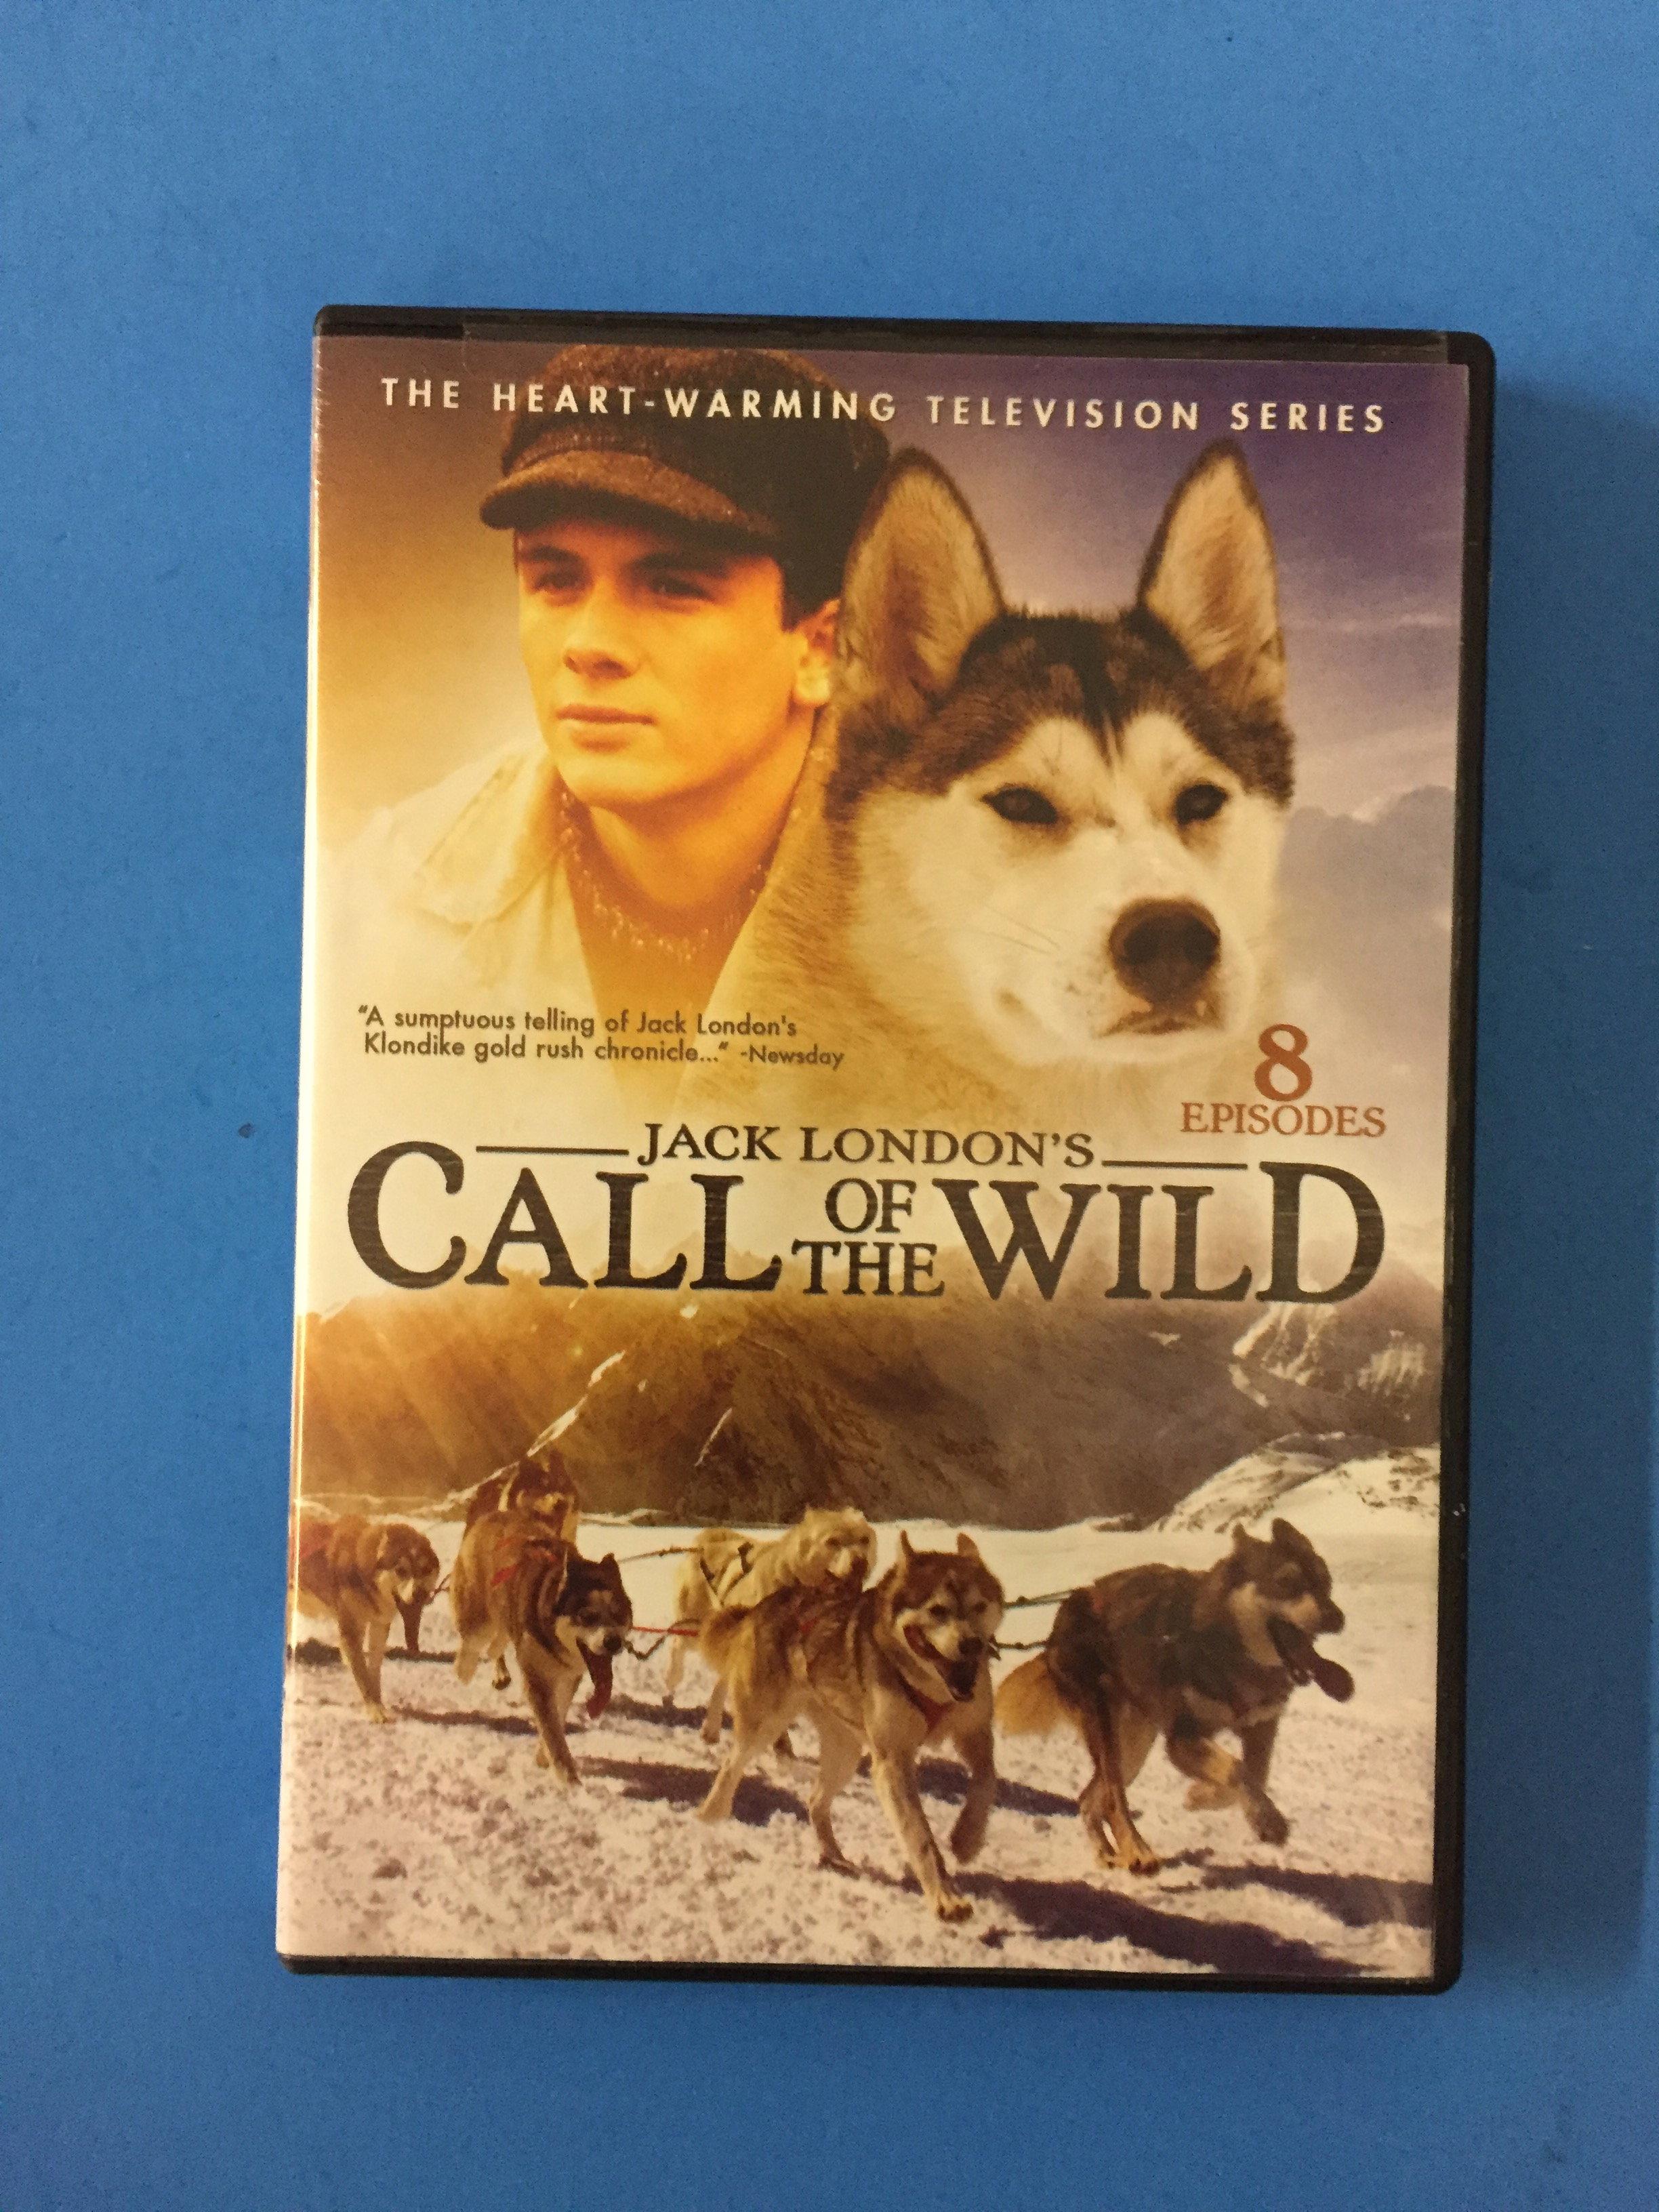 Jack London's Call of the Wild - 8 Episodes DVD